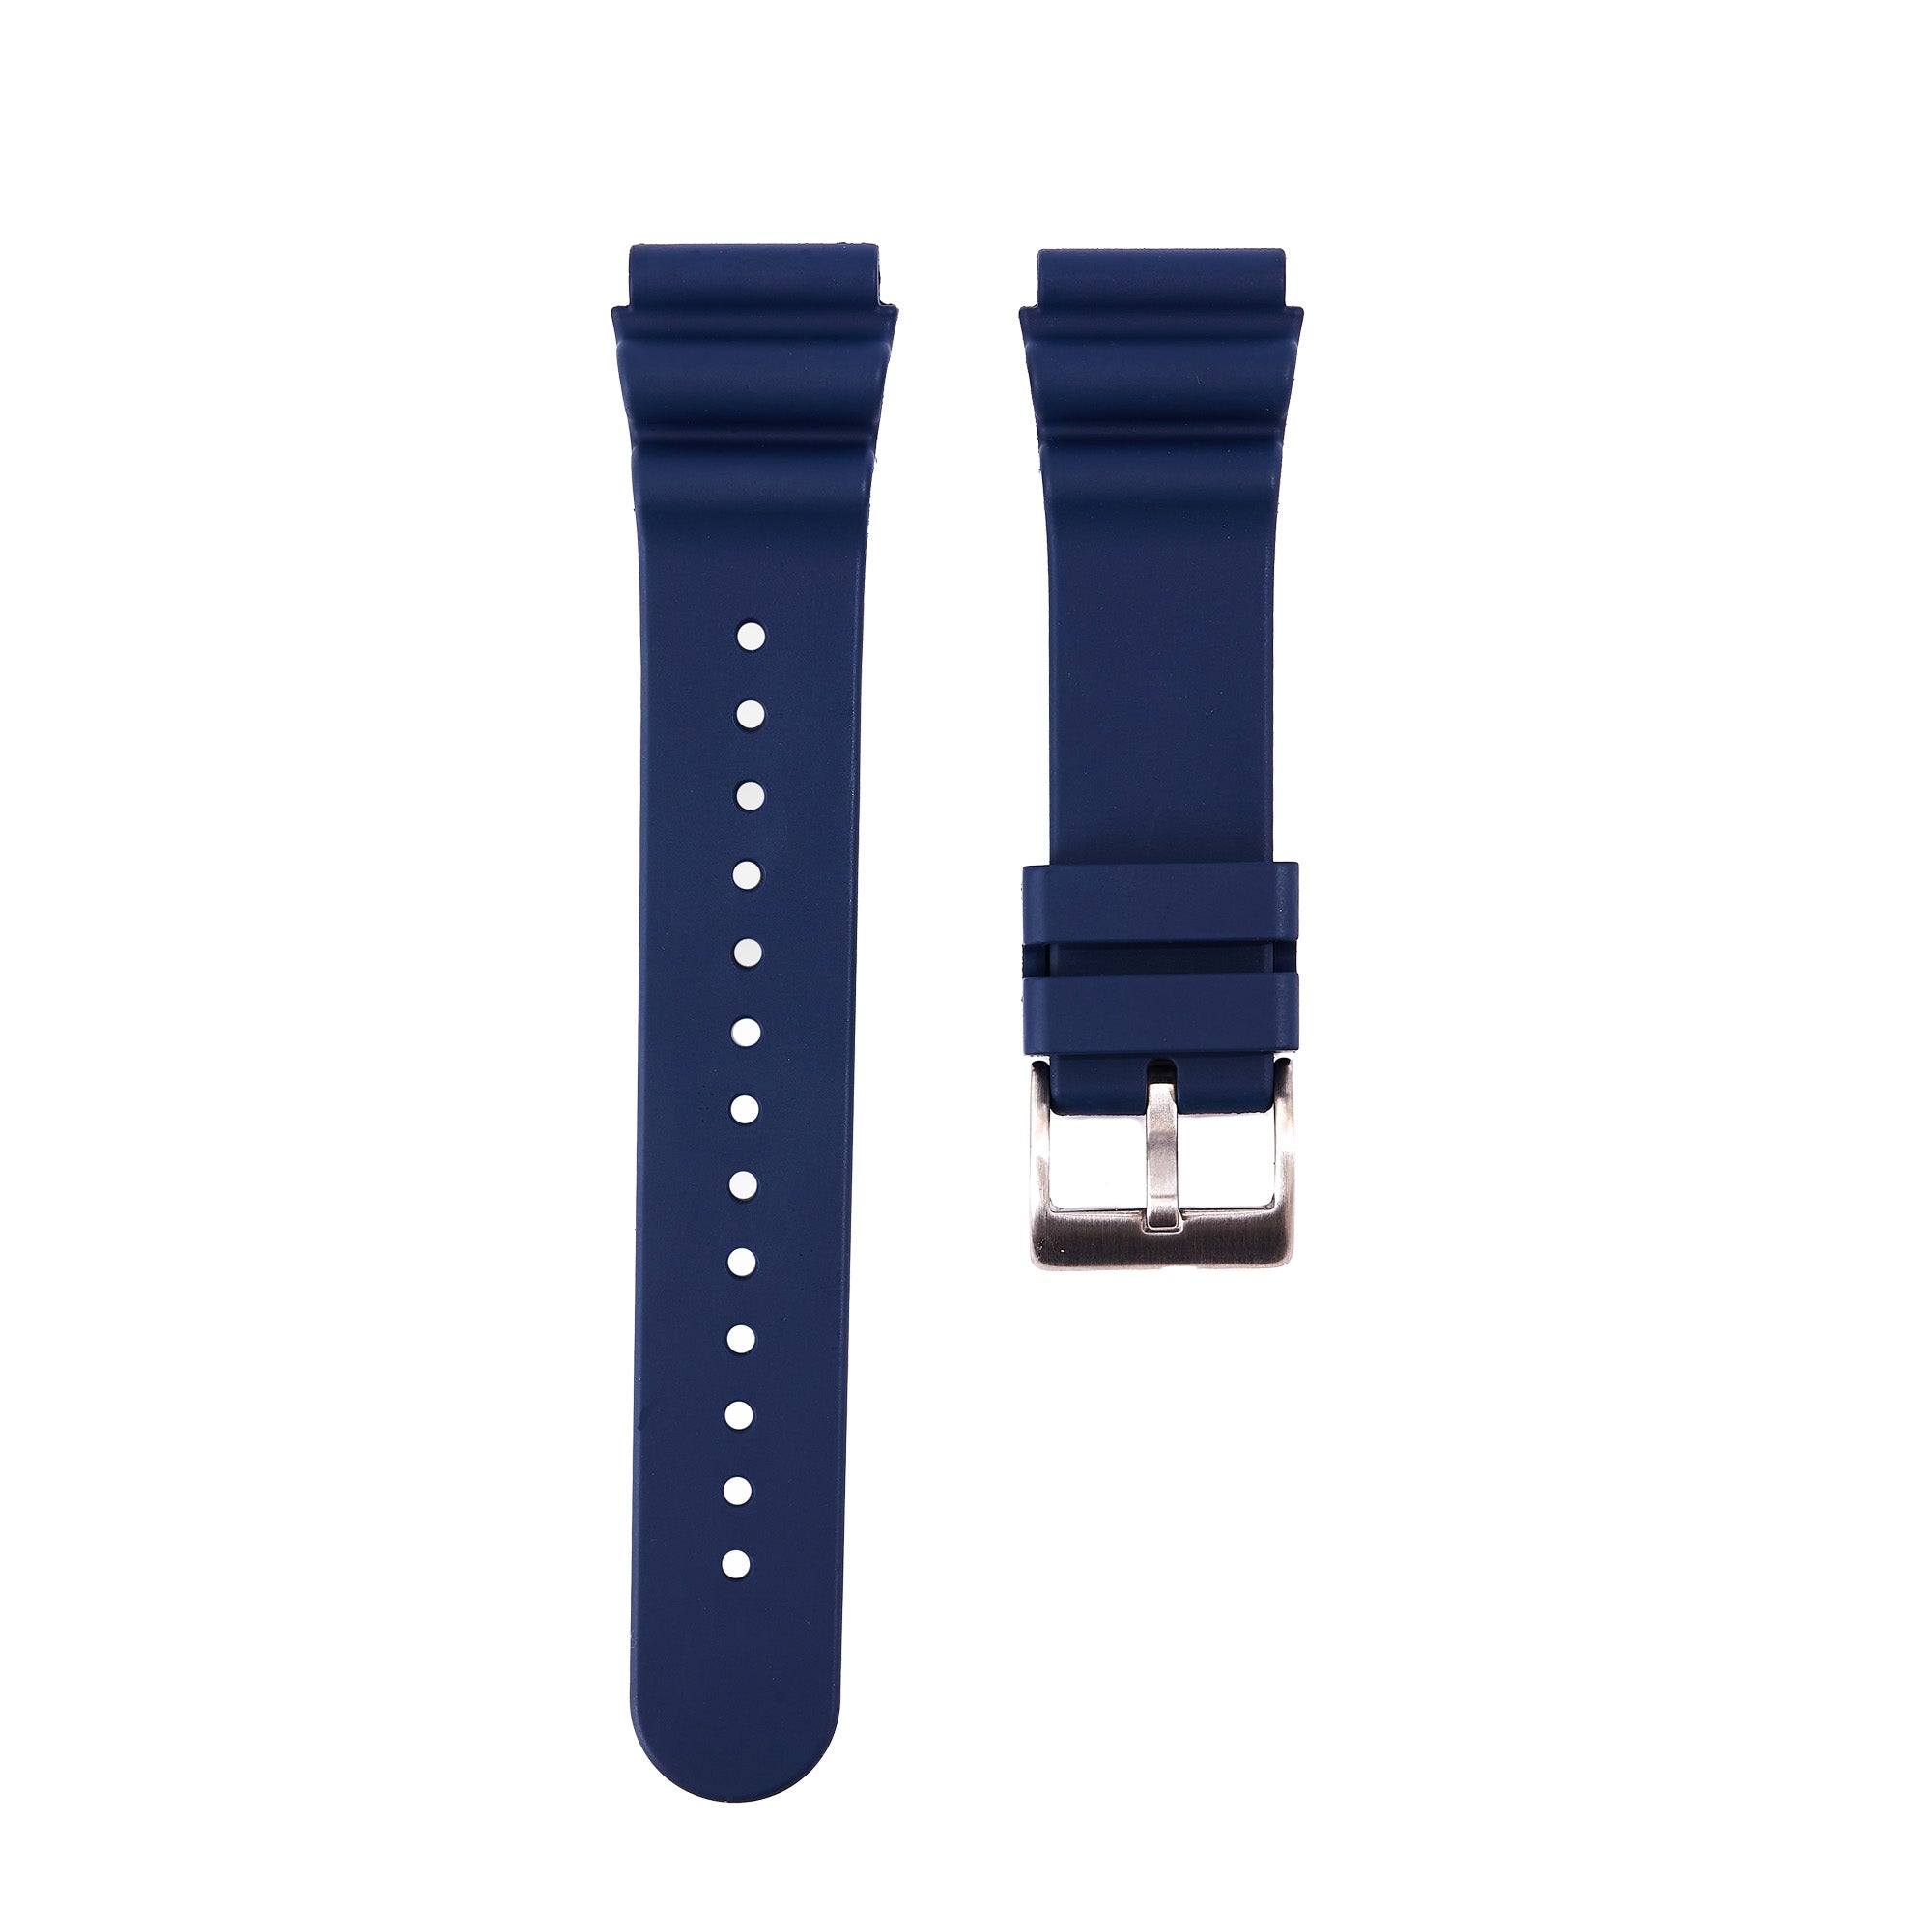 Wave FKM Rubber Strap-Compatible with Seiko Watches-Blue (2413)